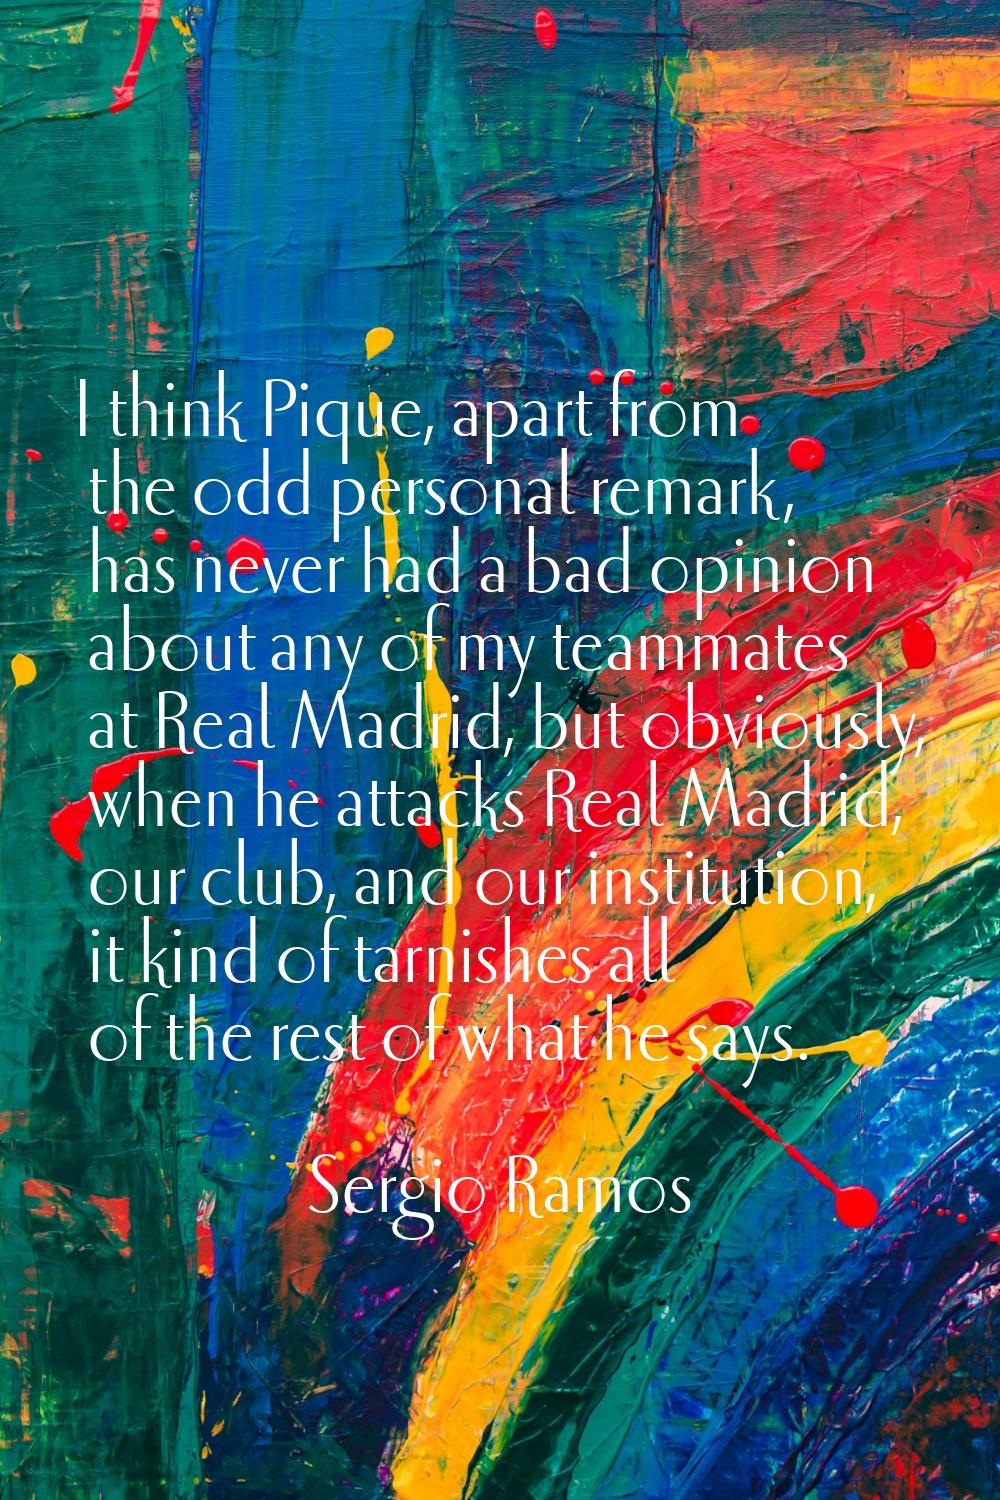 I think Pique, apart from the odd personal remark, has never had a bad opinion about any of my team